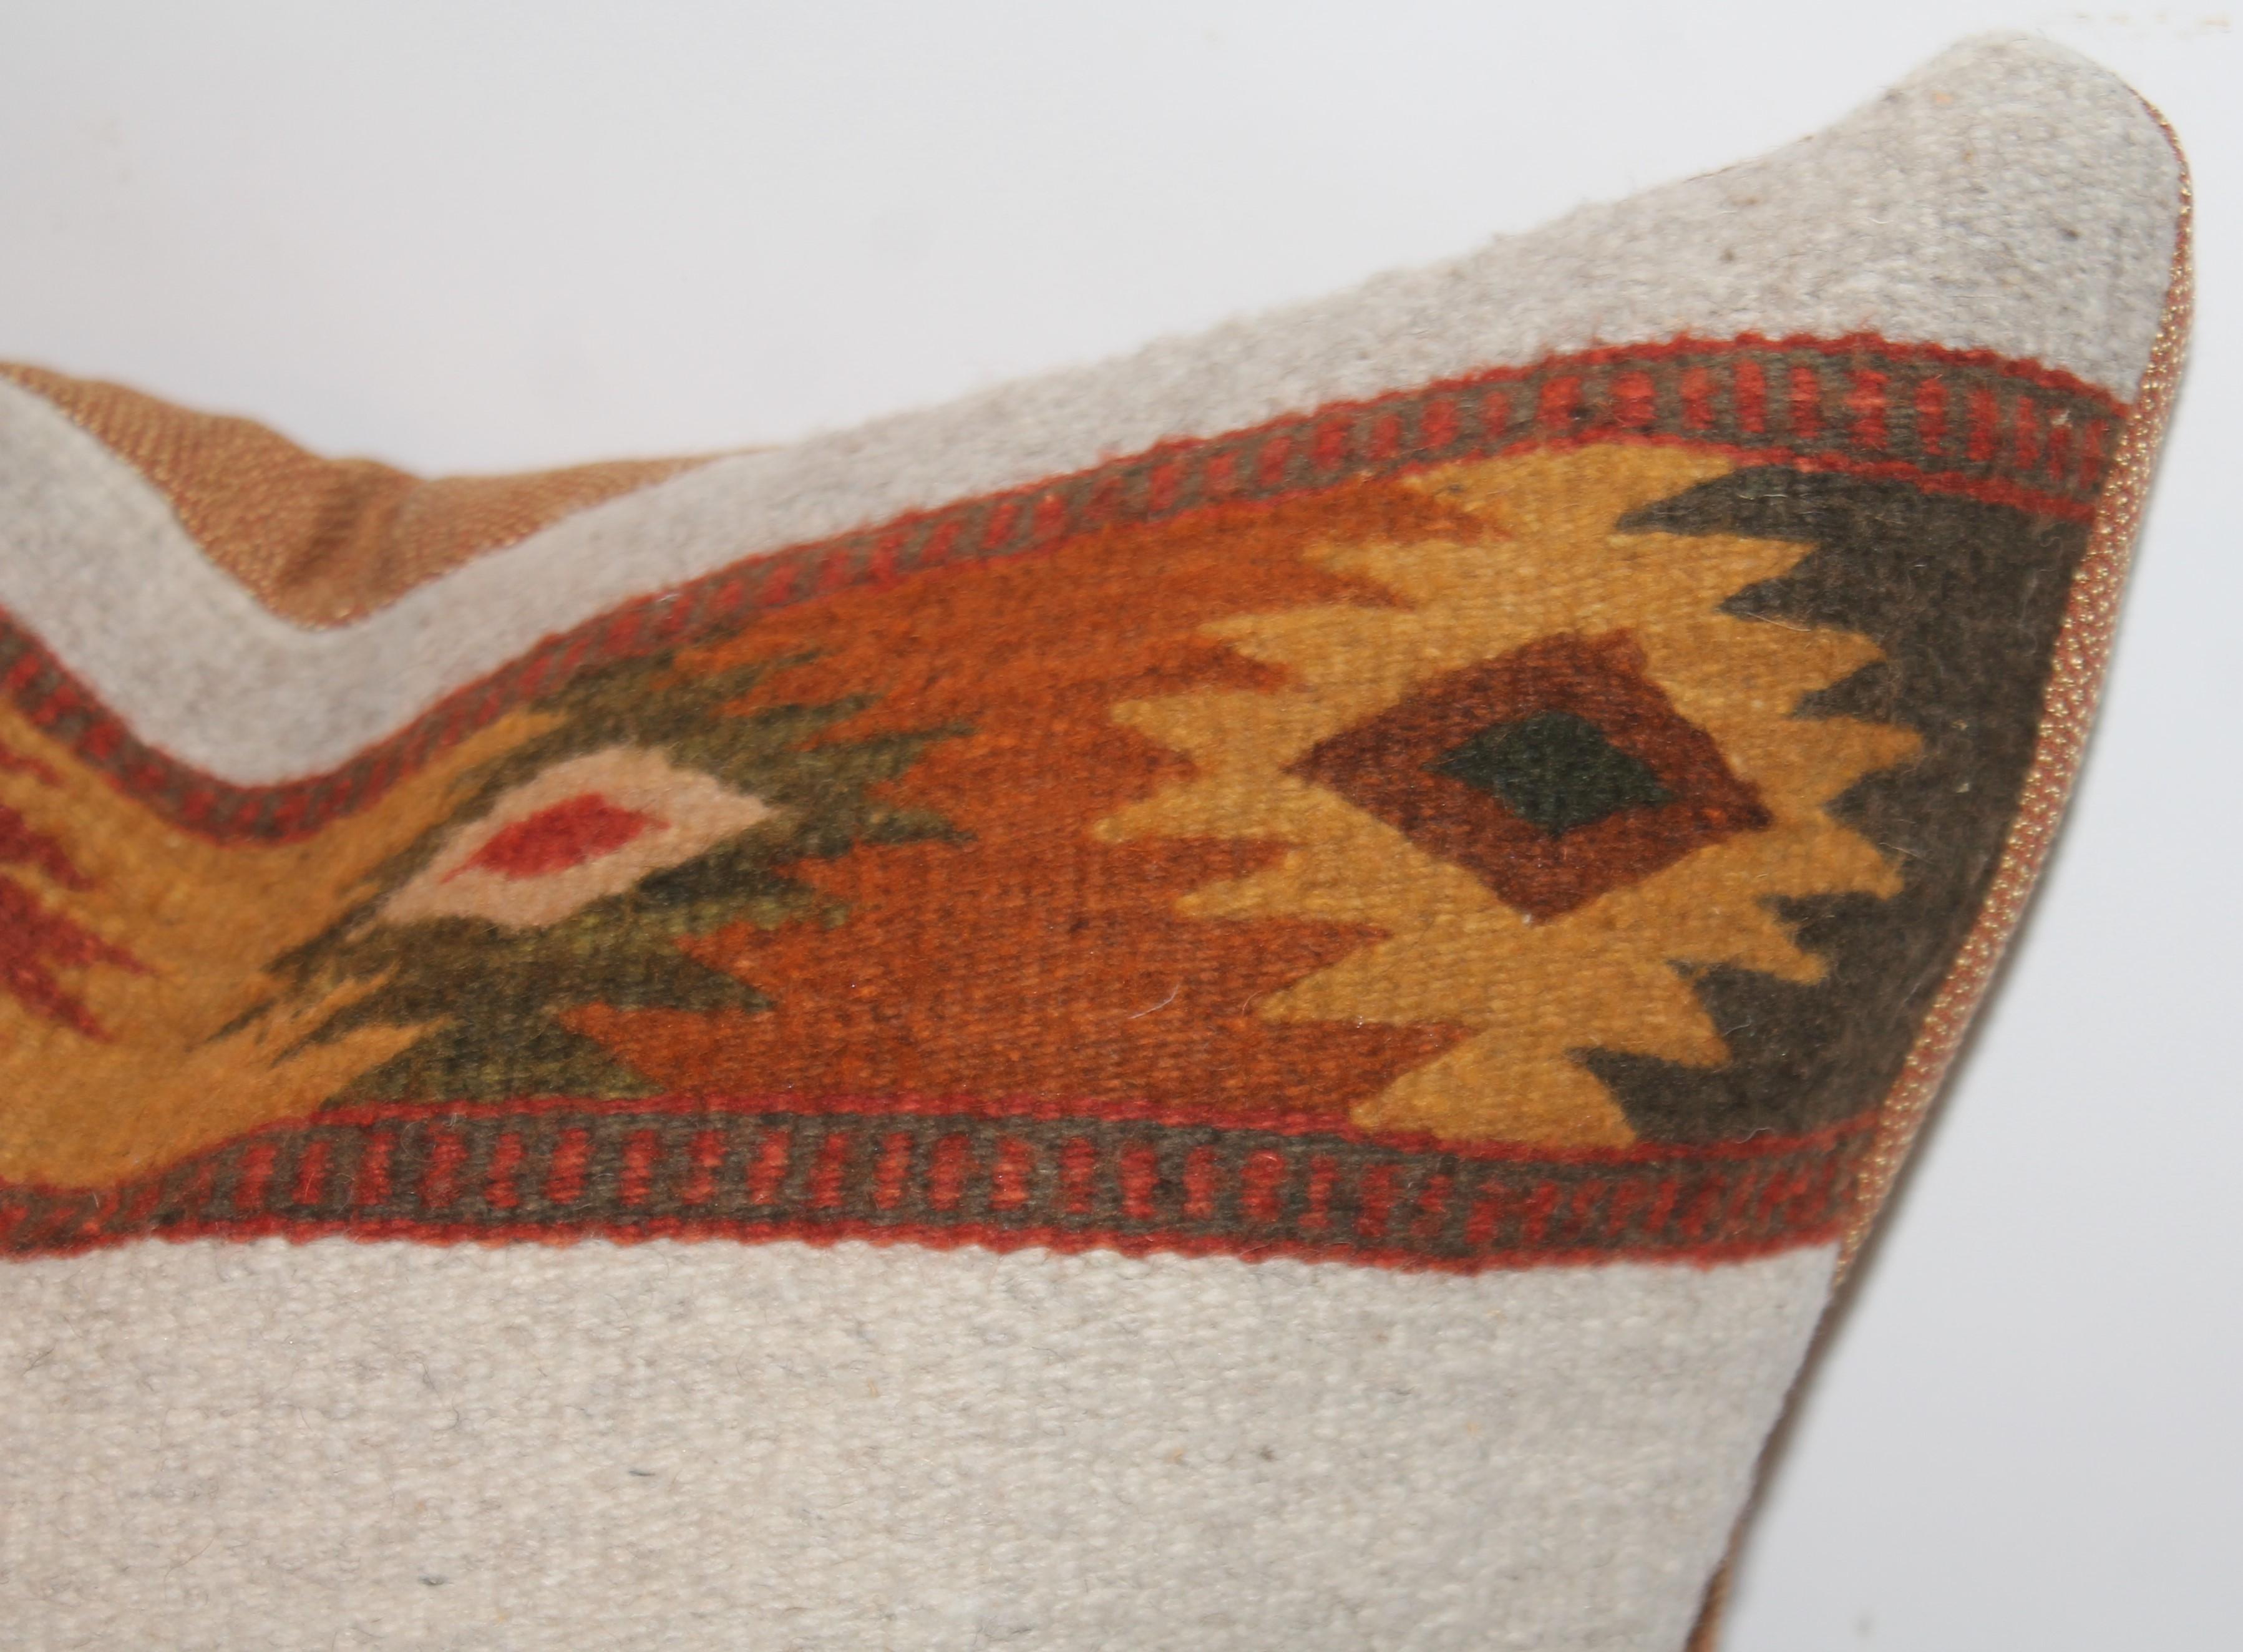 Antique Navajo Indian Weaving custom made pillow. New Feather and Down Insert.